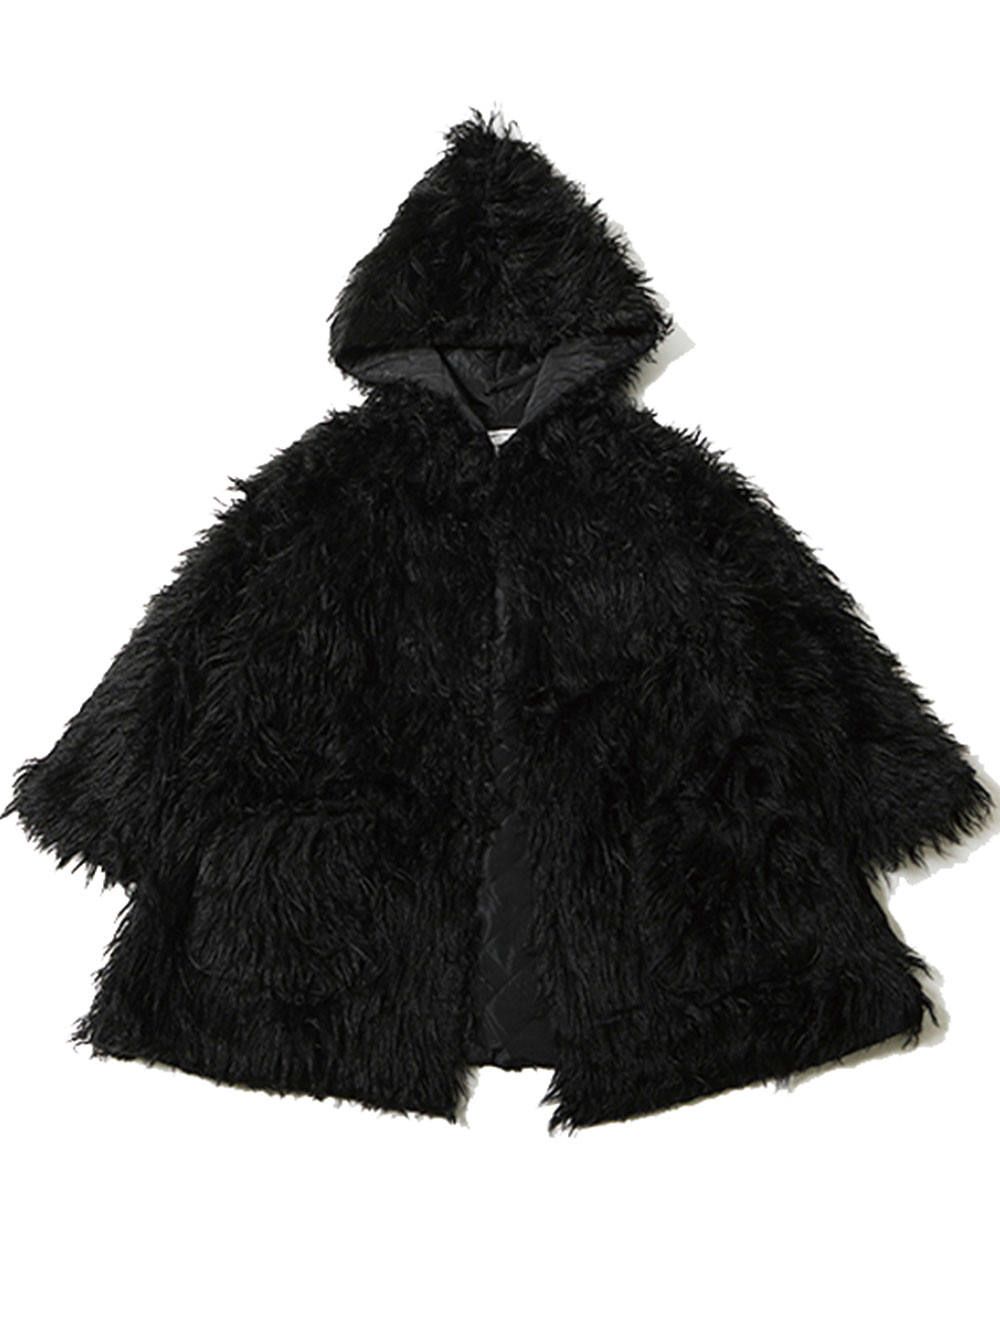 SILLENT FROM ME - IMITATE -Reversible Fur Gown- | DOLL